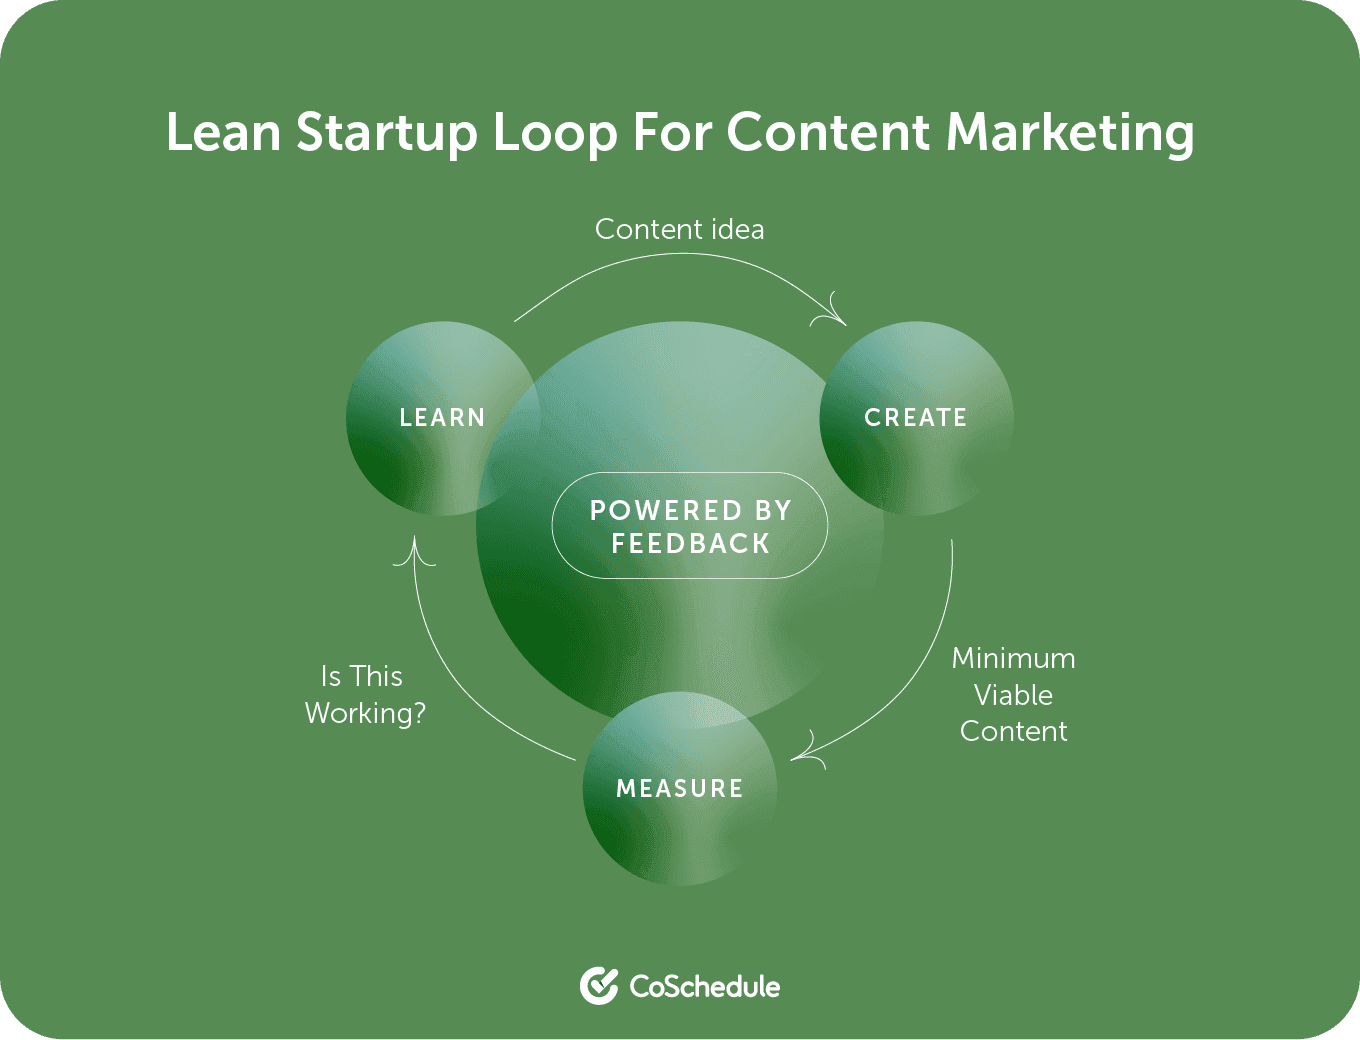 The lean startup loop for content marketing which includes learn, create, and measure.